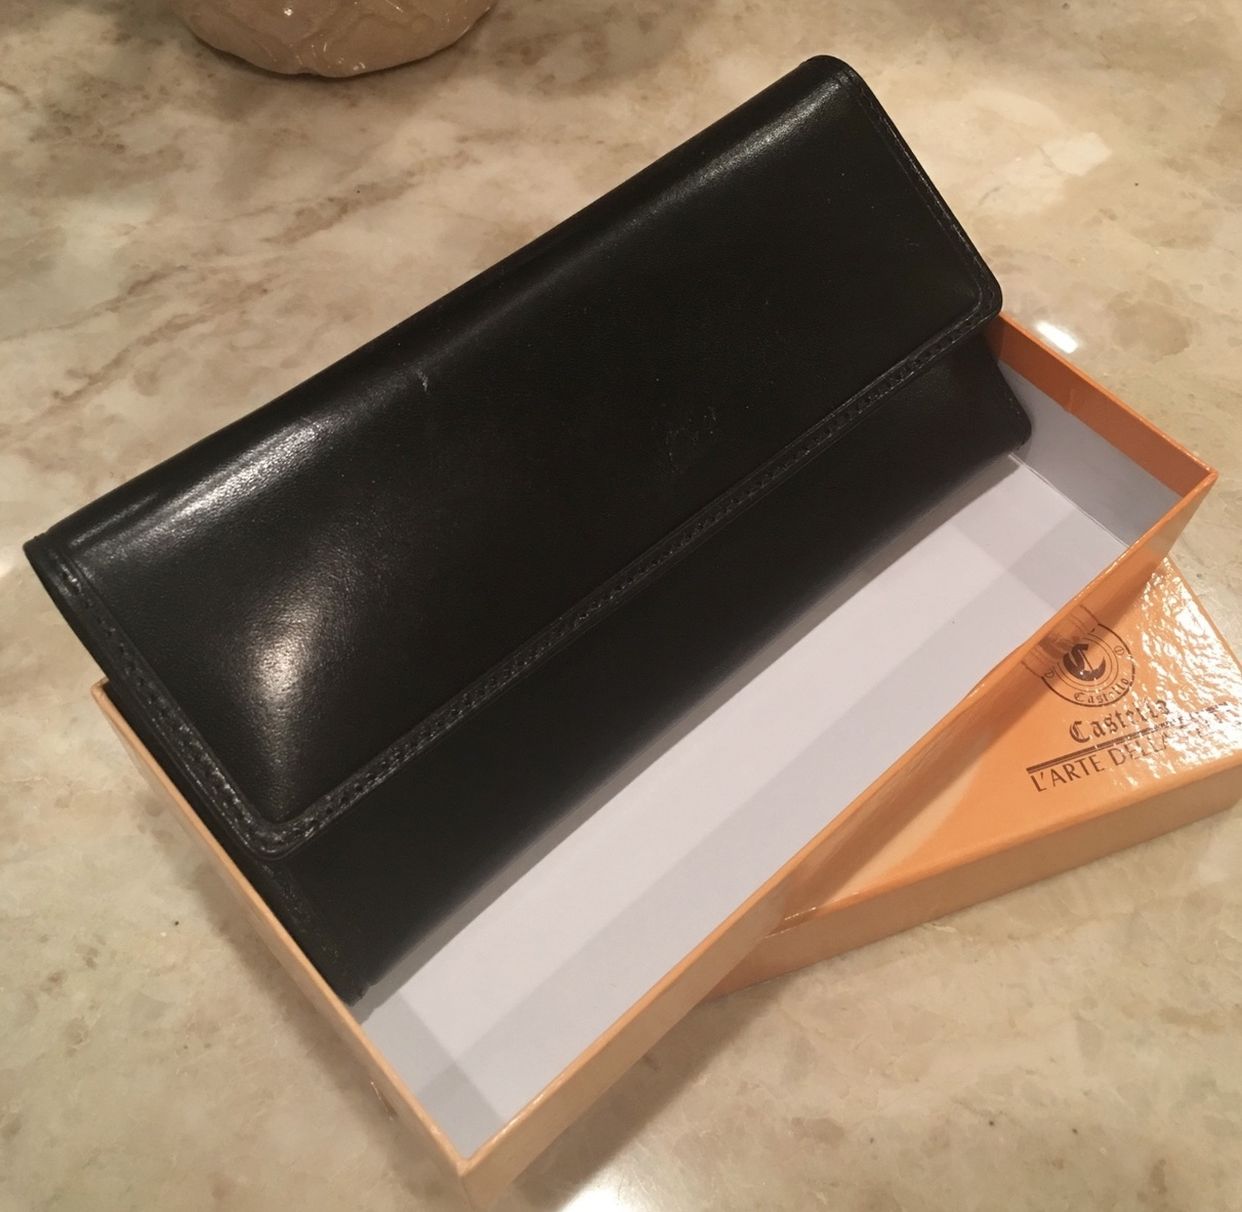 Black Genuine Leather Wallet - Brand New in Box